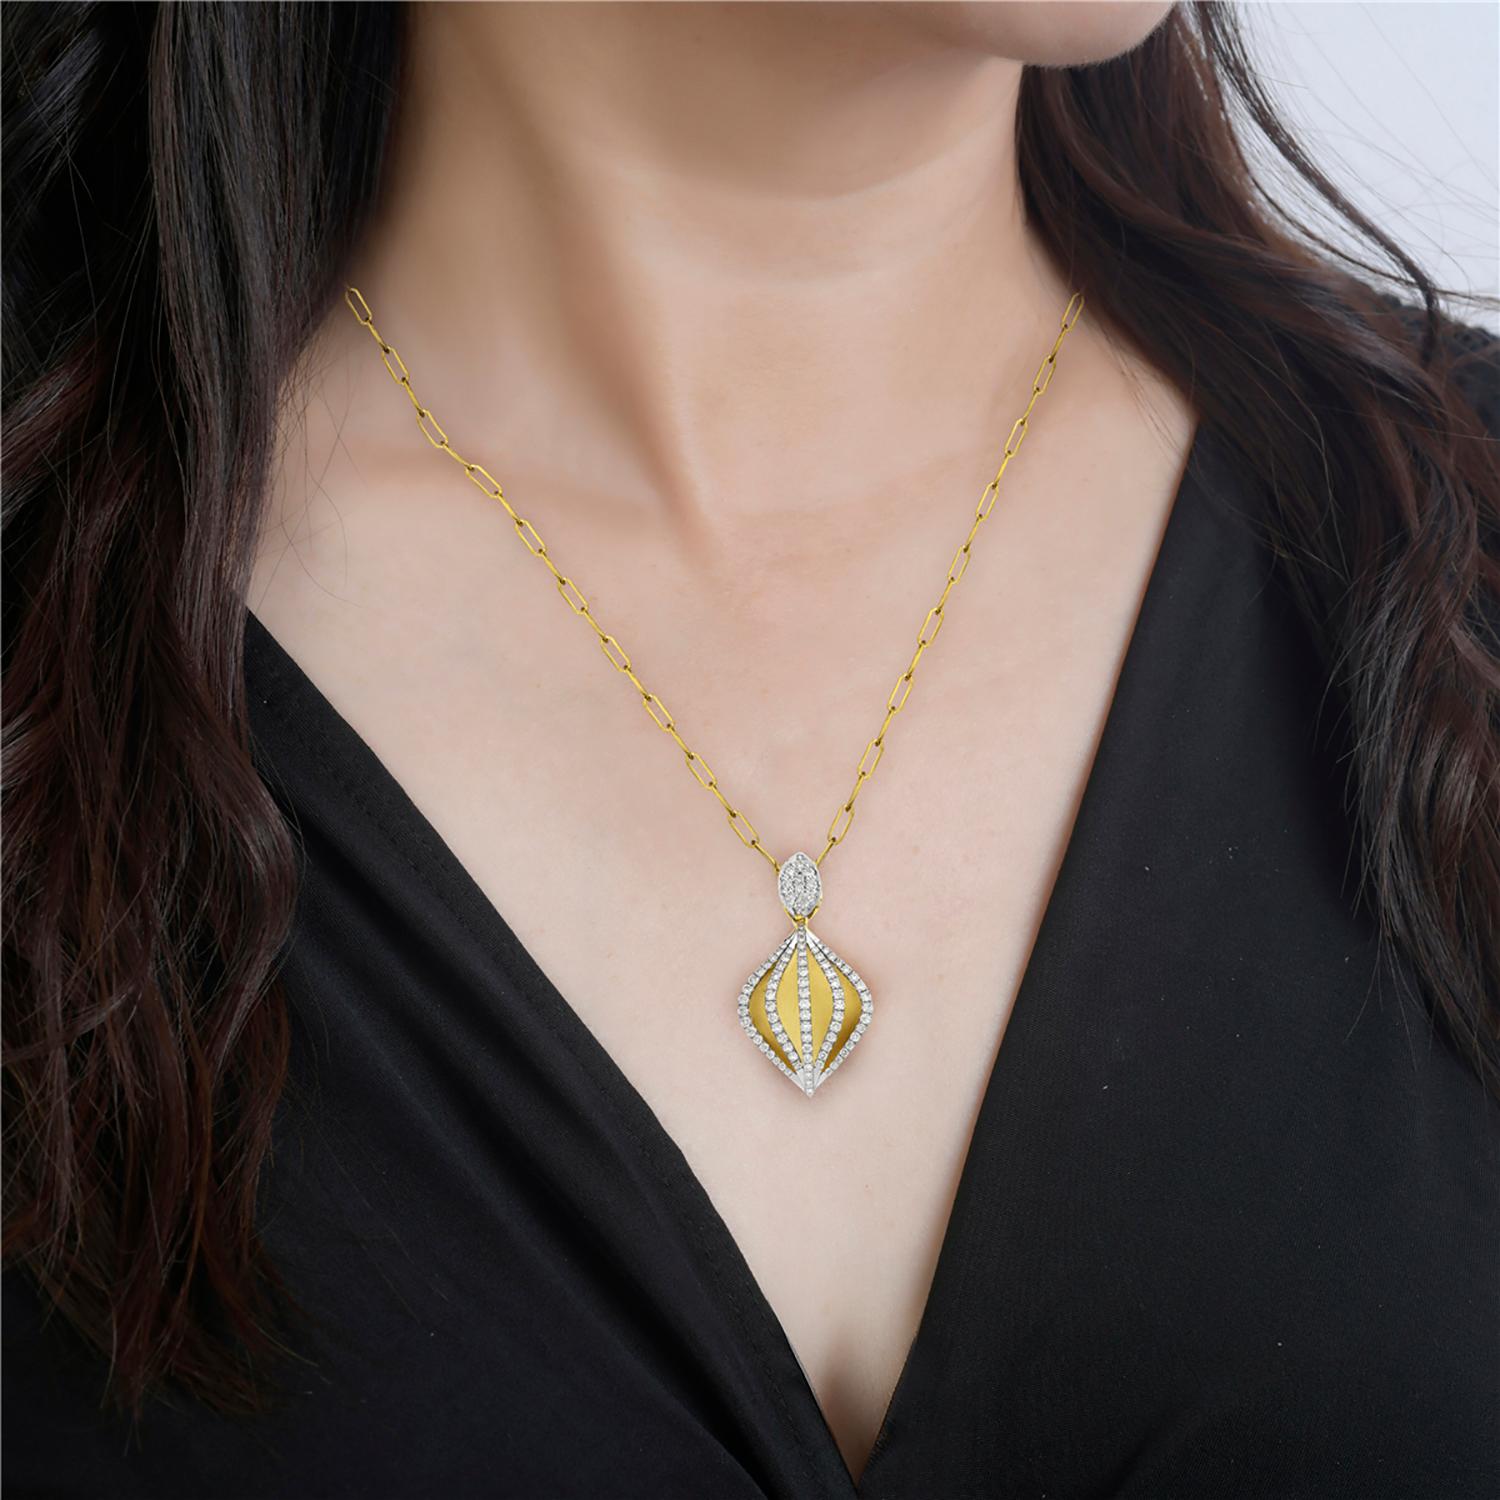 Introducing a stunning Pear Shaped Pendant made with the finest materials to ensure a lasting piece of jewelry. The pendant features a pear-shaped design, beautifully crafted in 14k yellow gold, providing a warm and luxurious